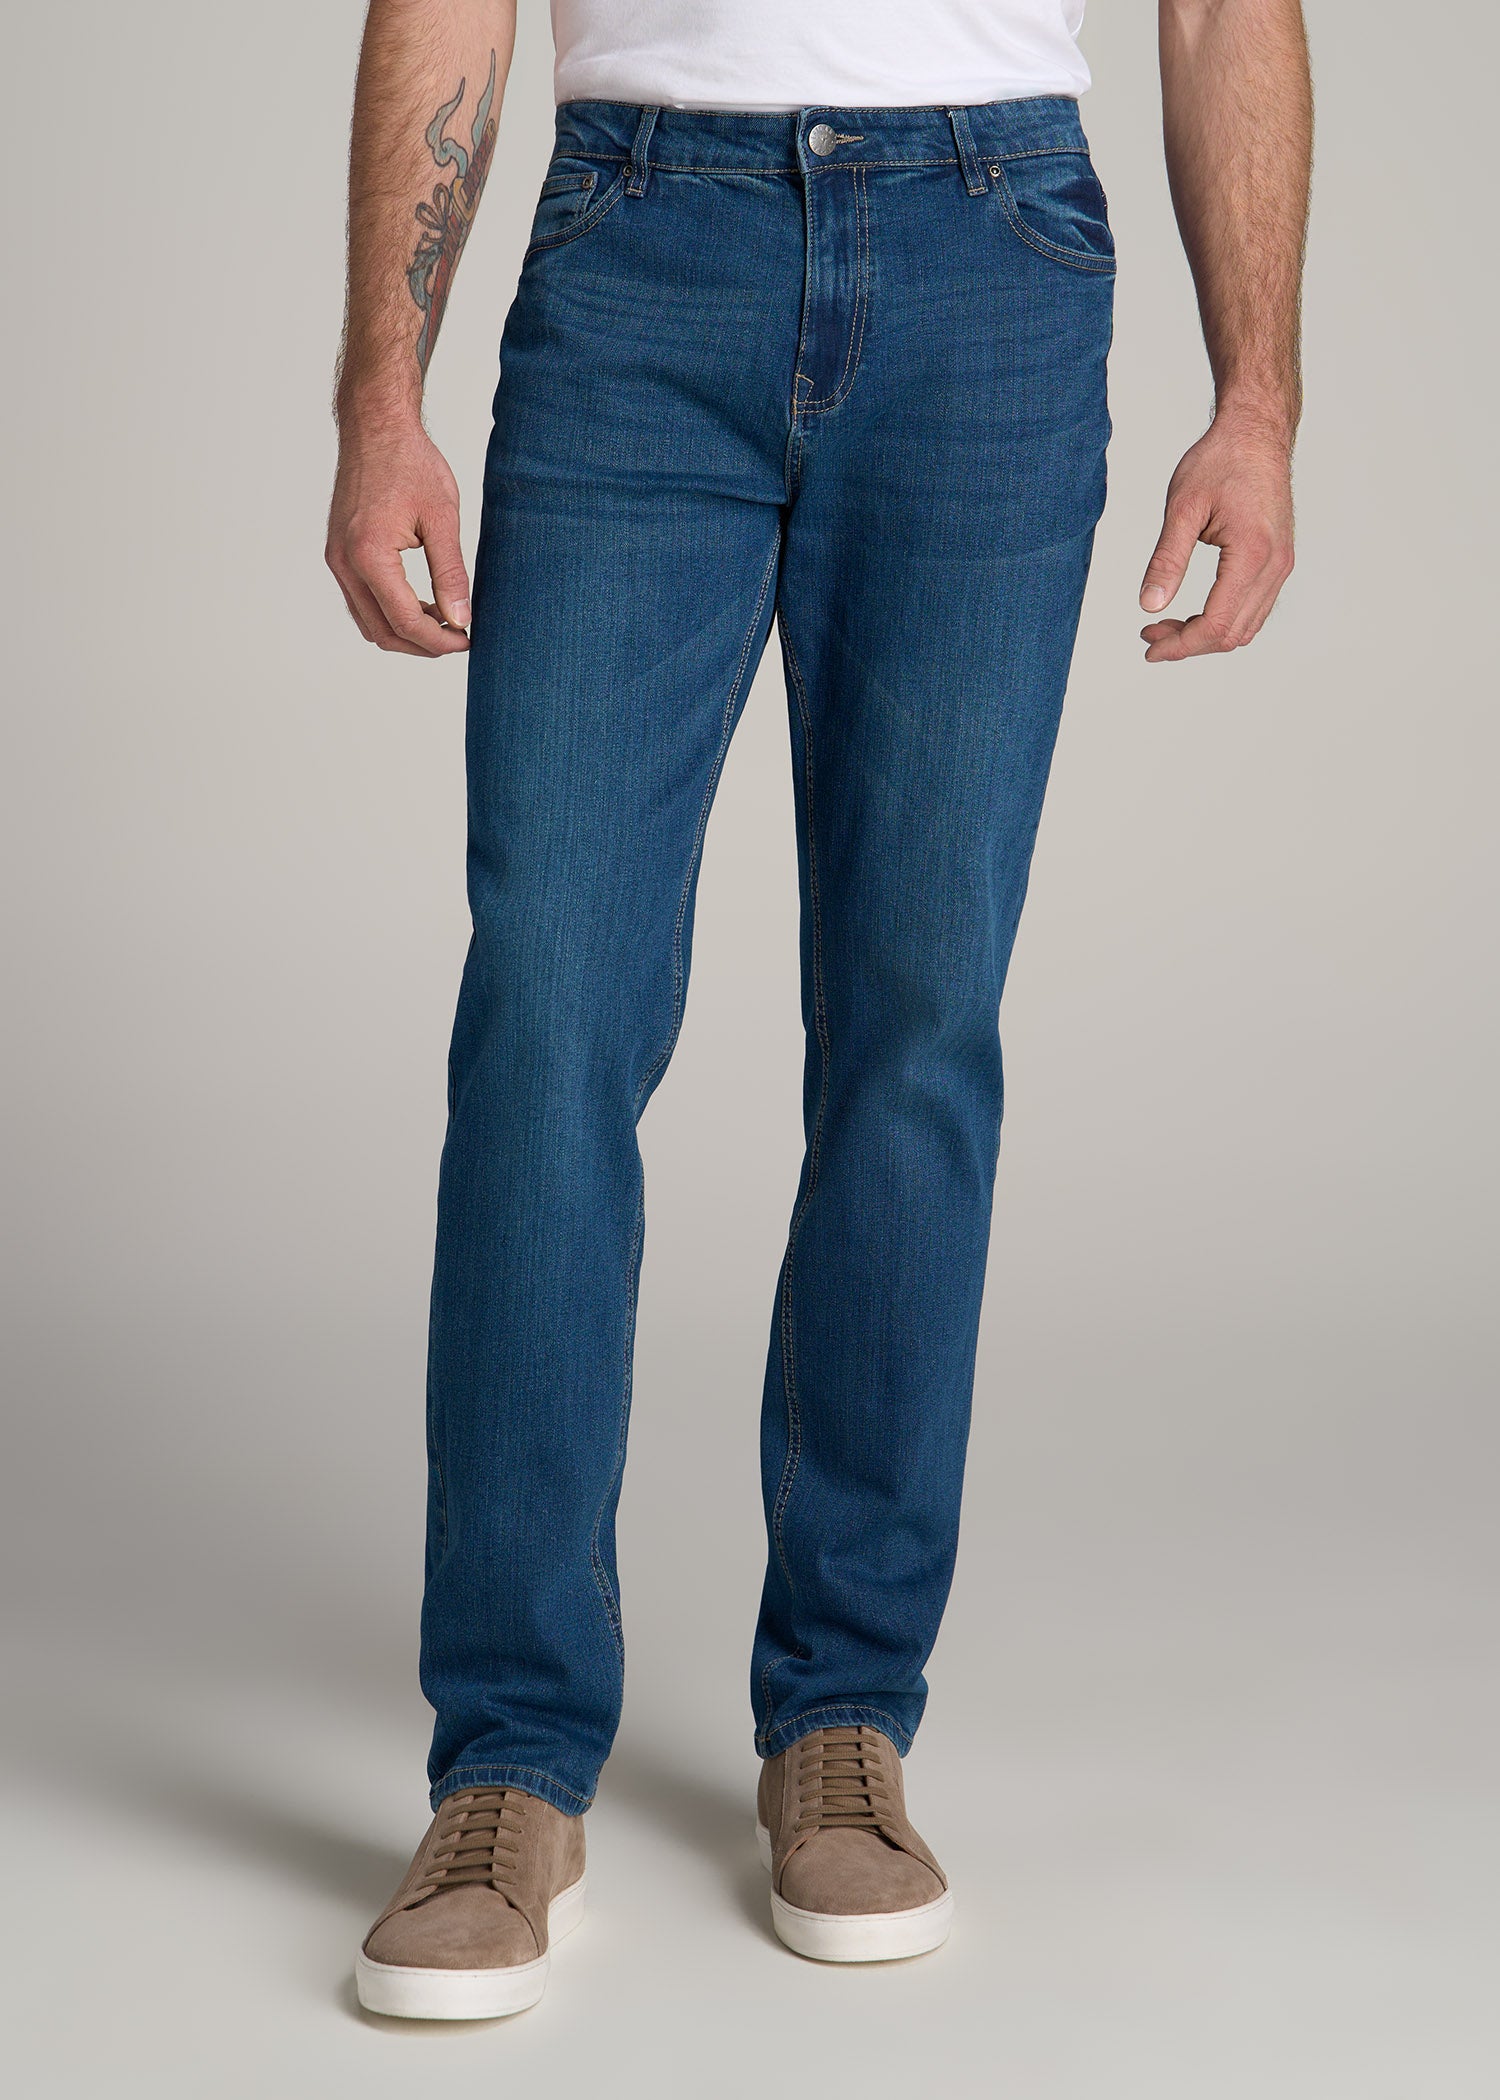 Semi-Relaxed Men's Jeans Signature Fade | American Tall